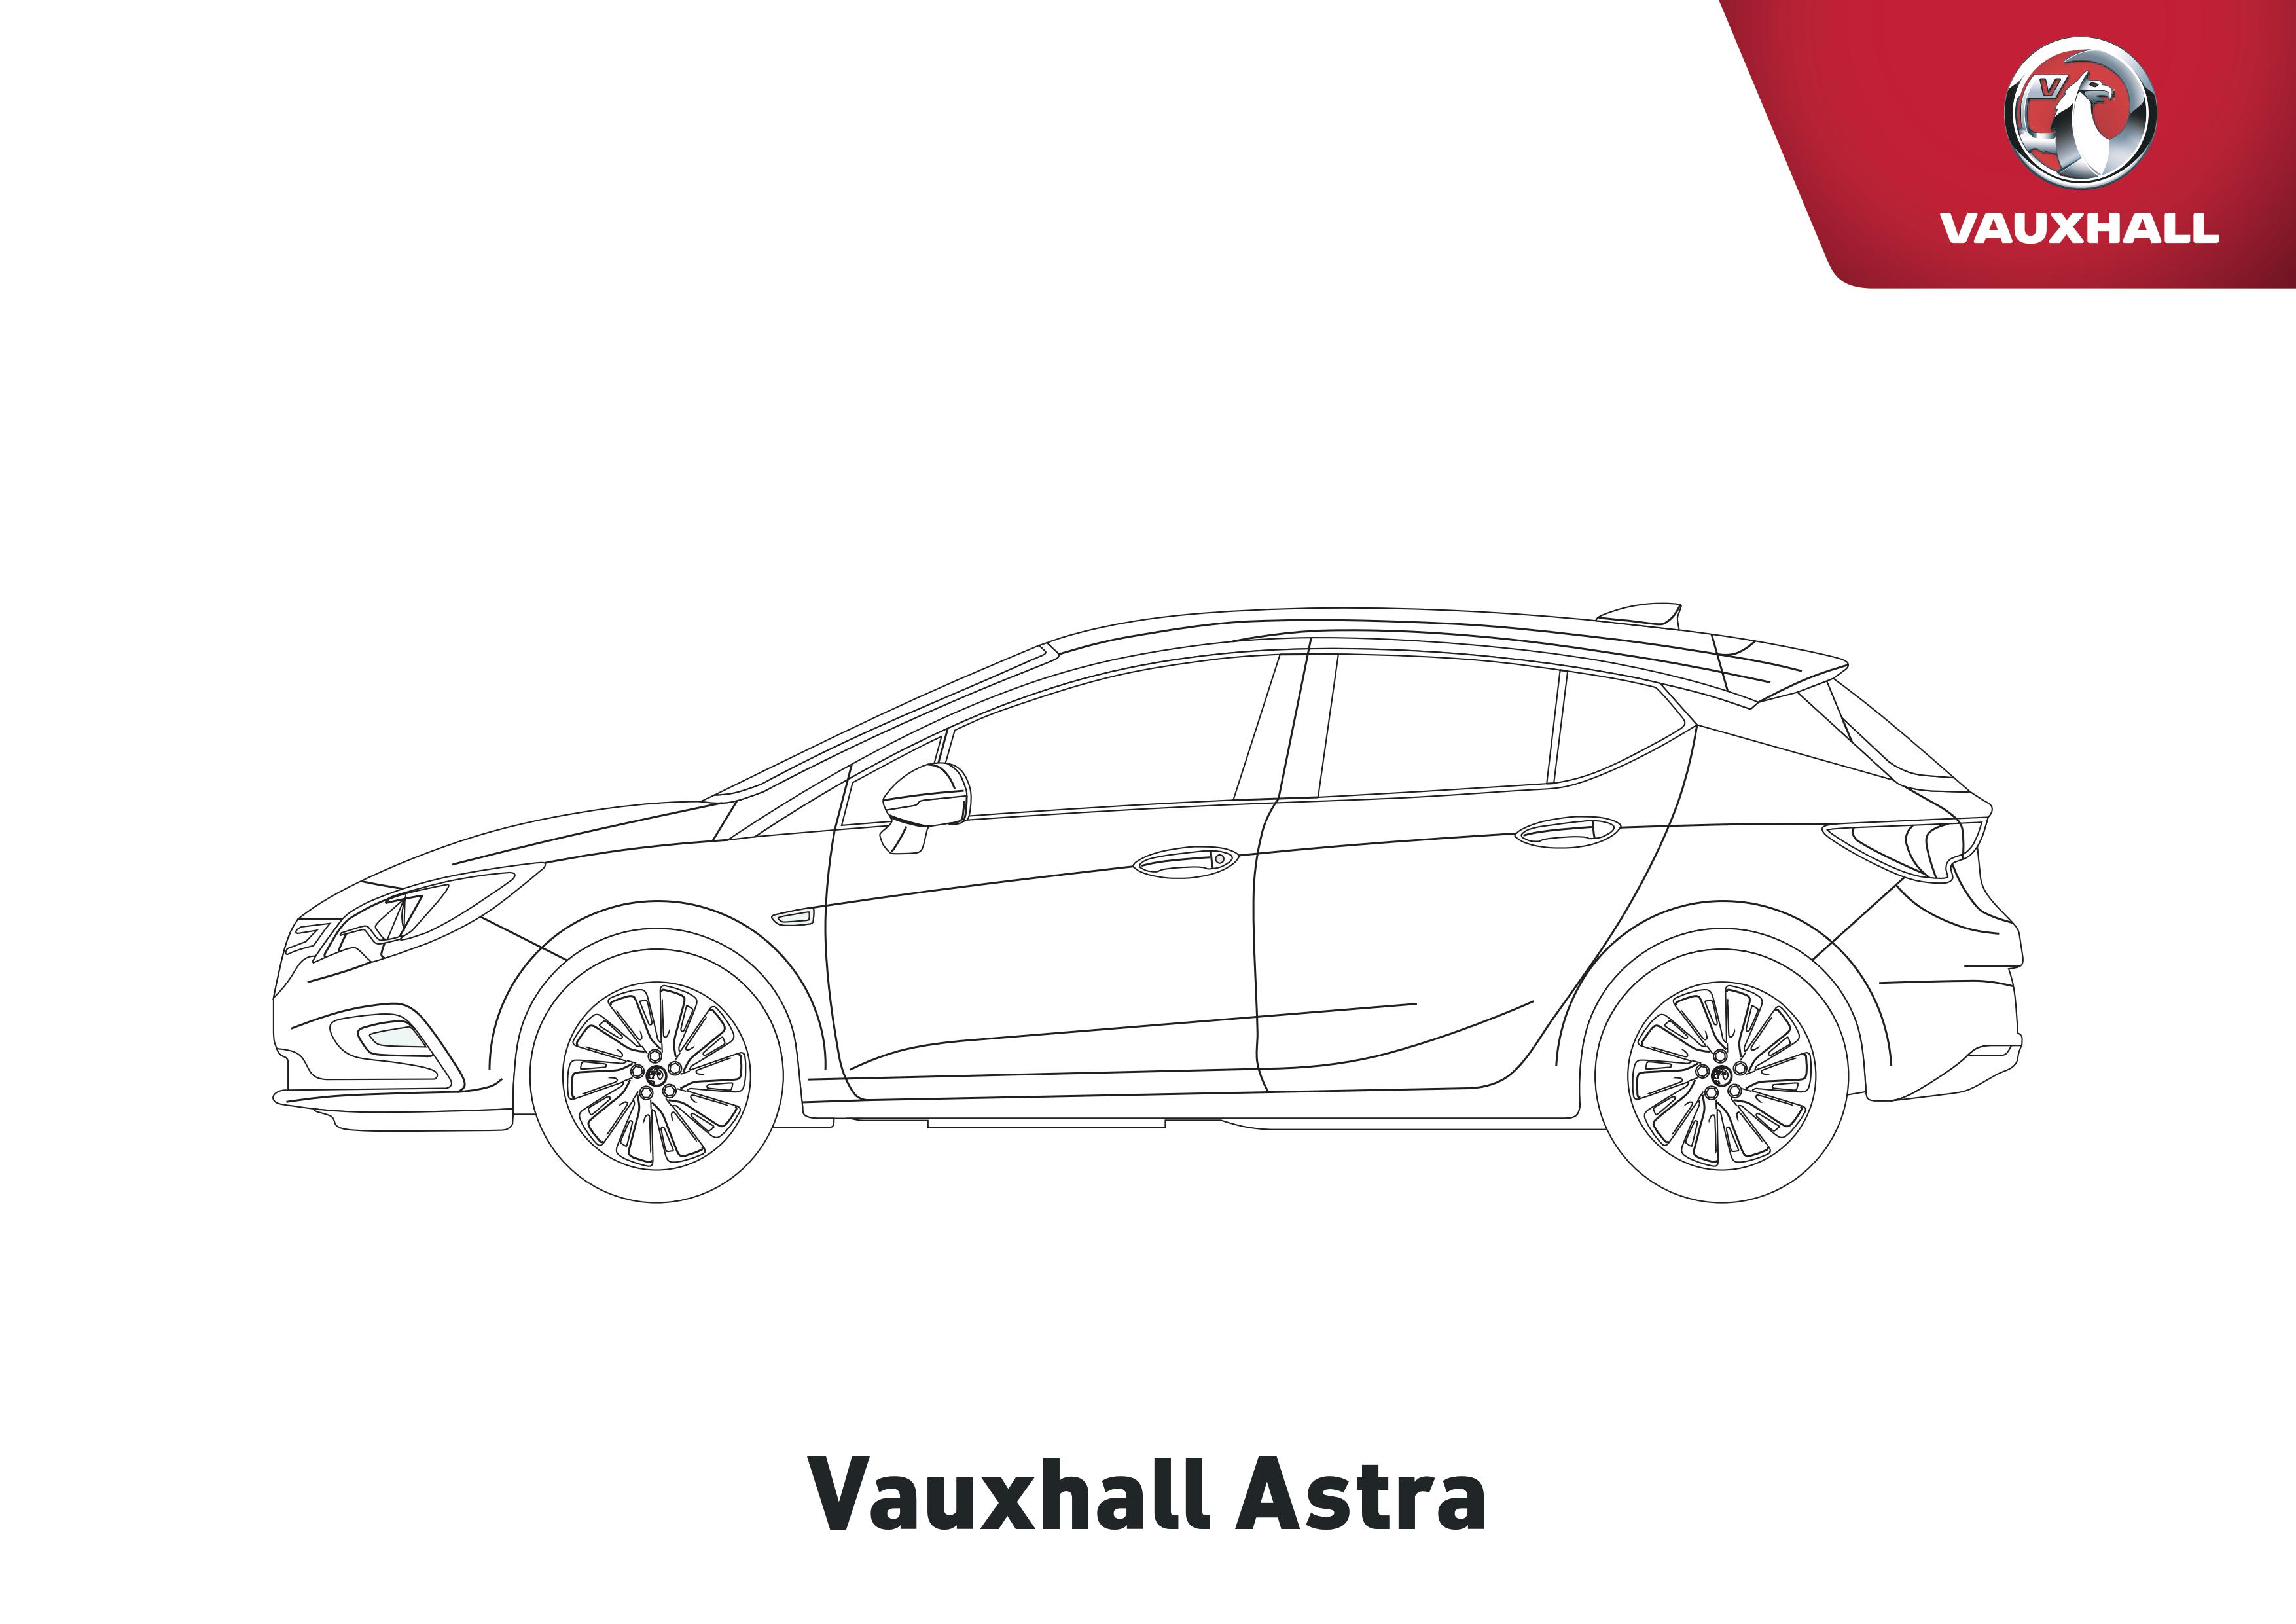 Vauxhall Astra Colouring Sheet